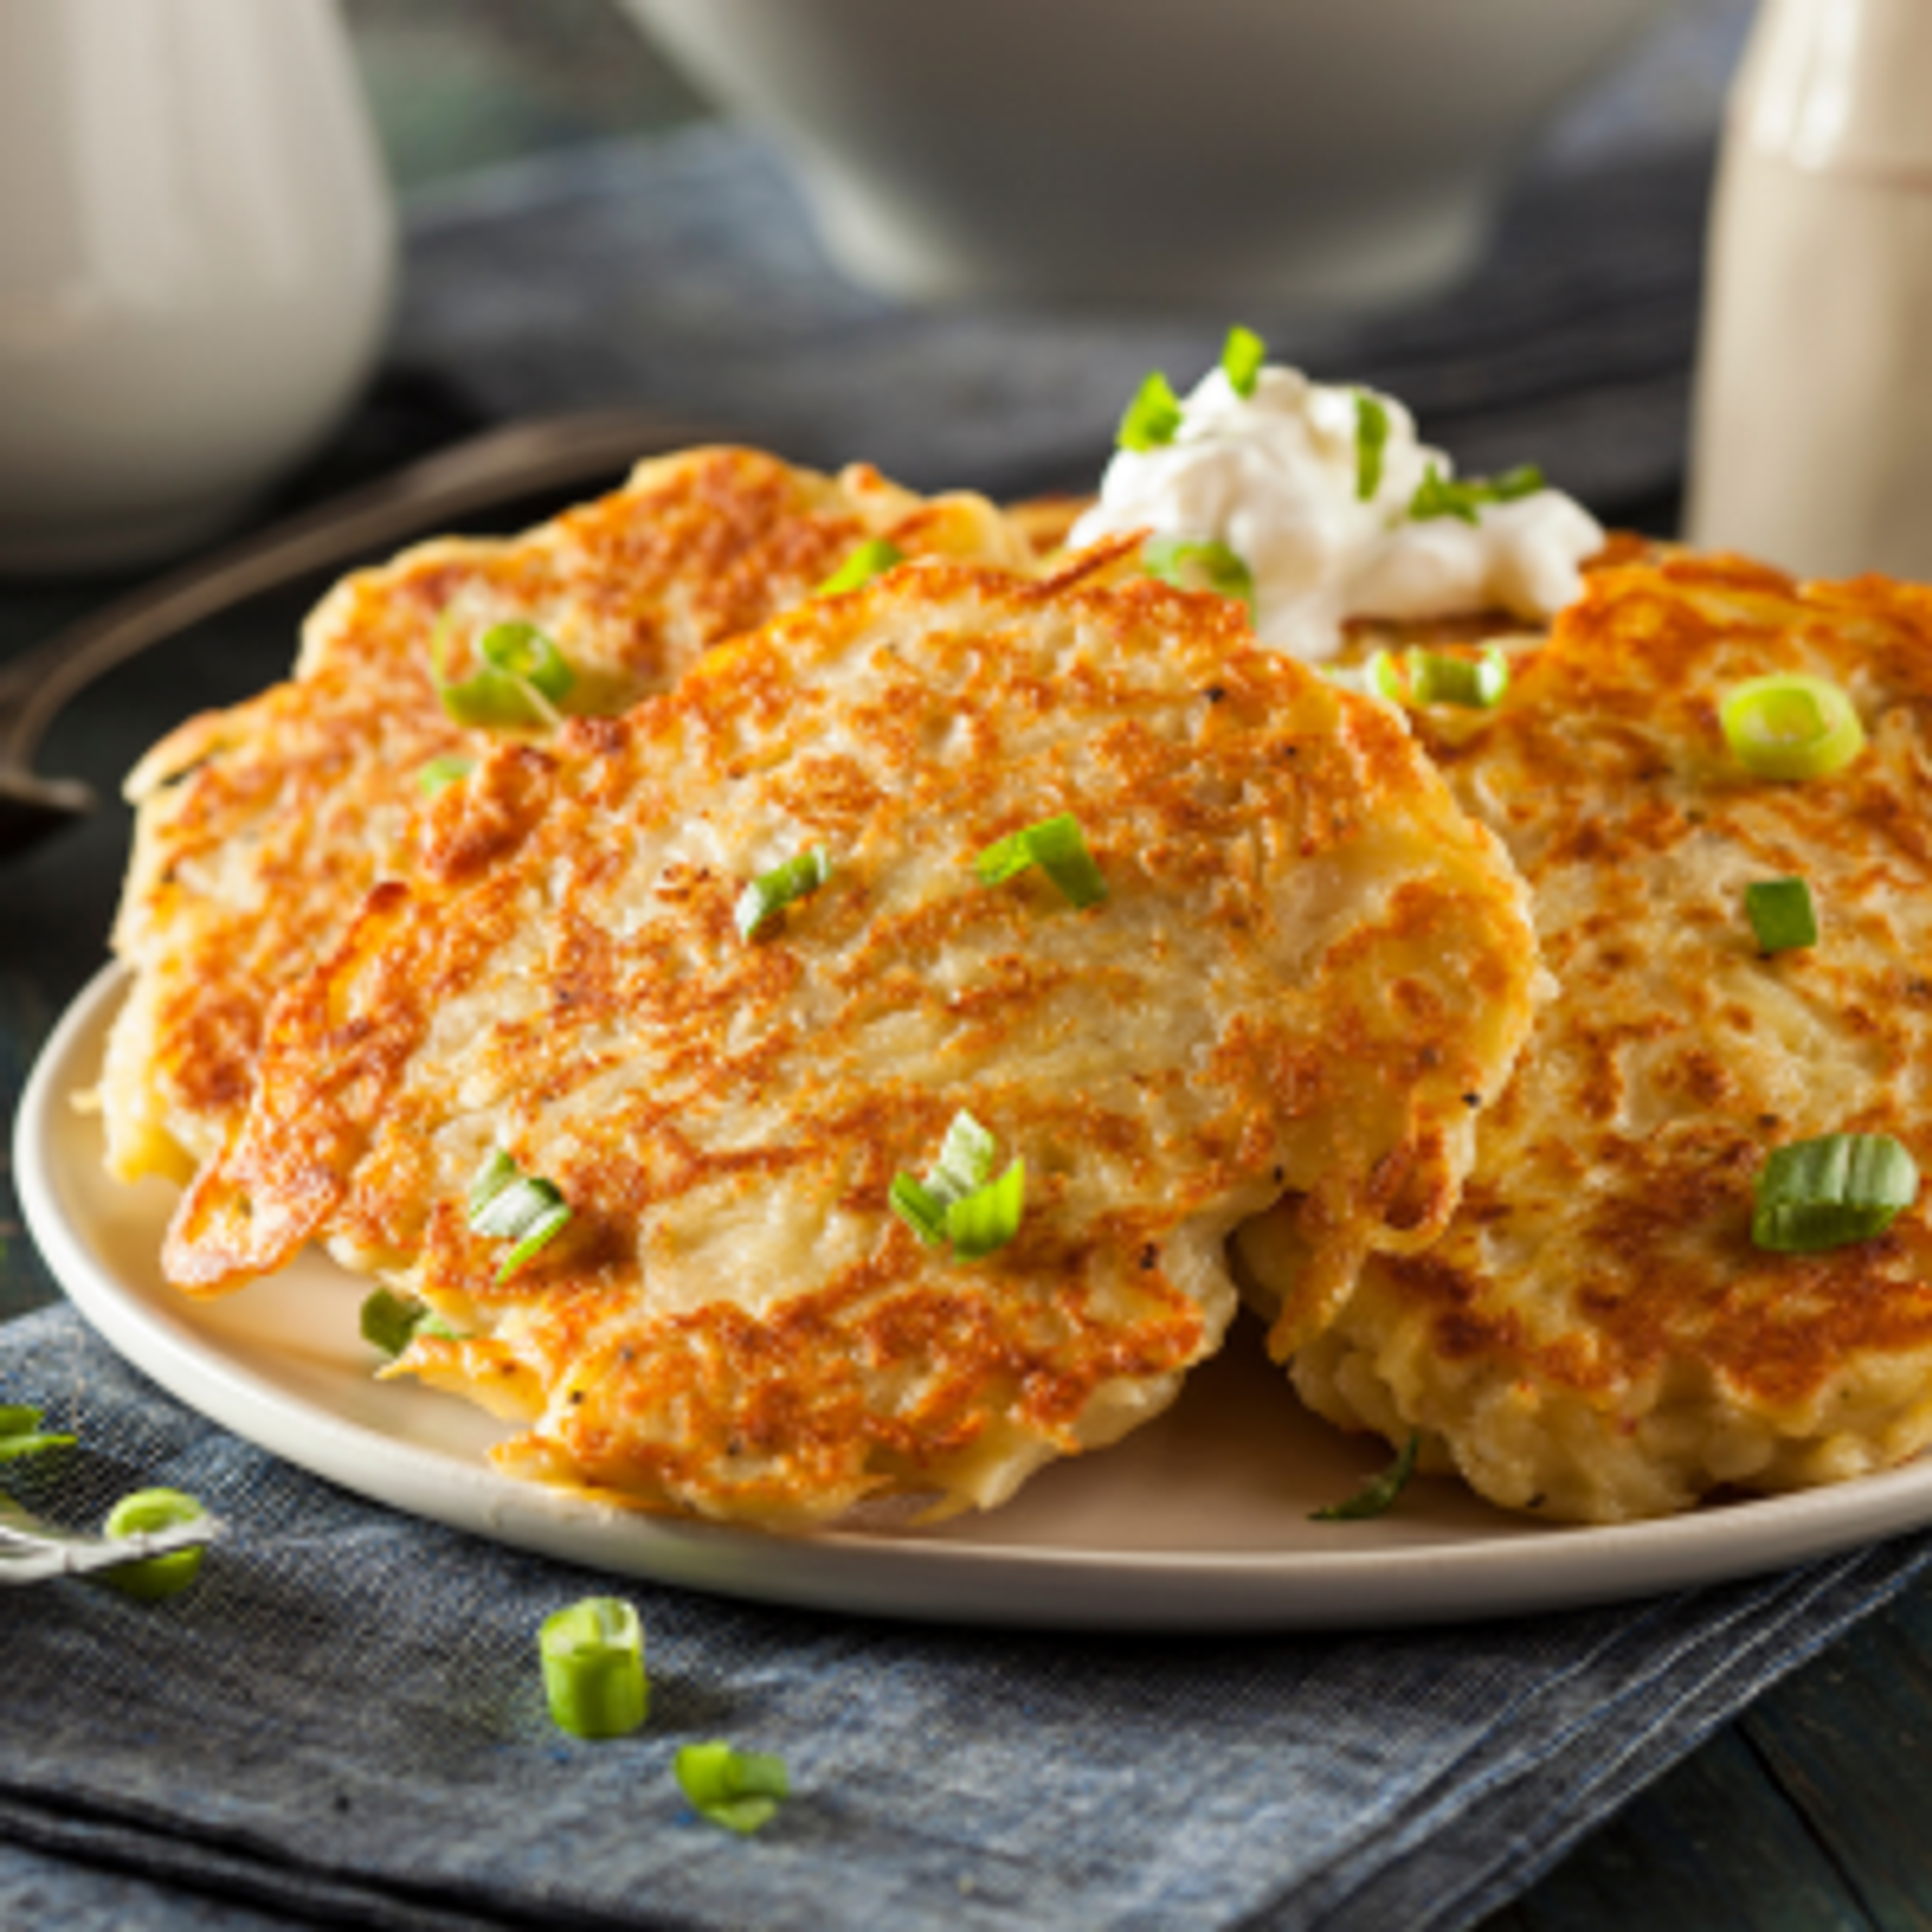 Boxty, made from potatoes, flour and buttermilk, and served with sour cream and spring onions